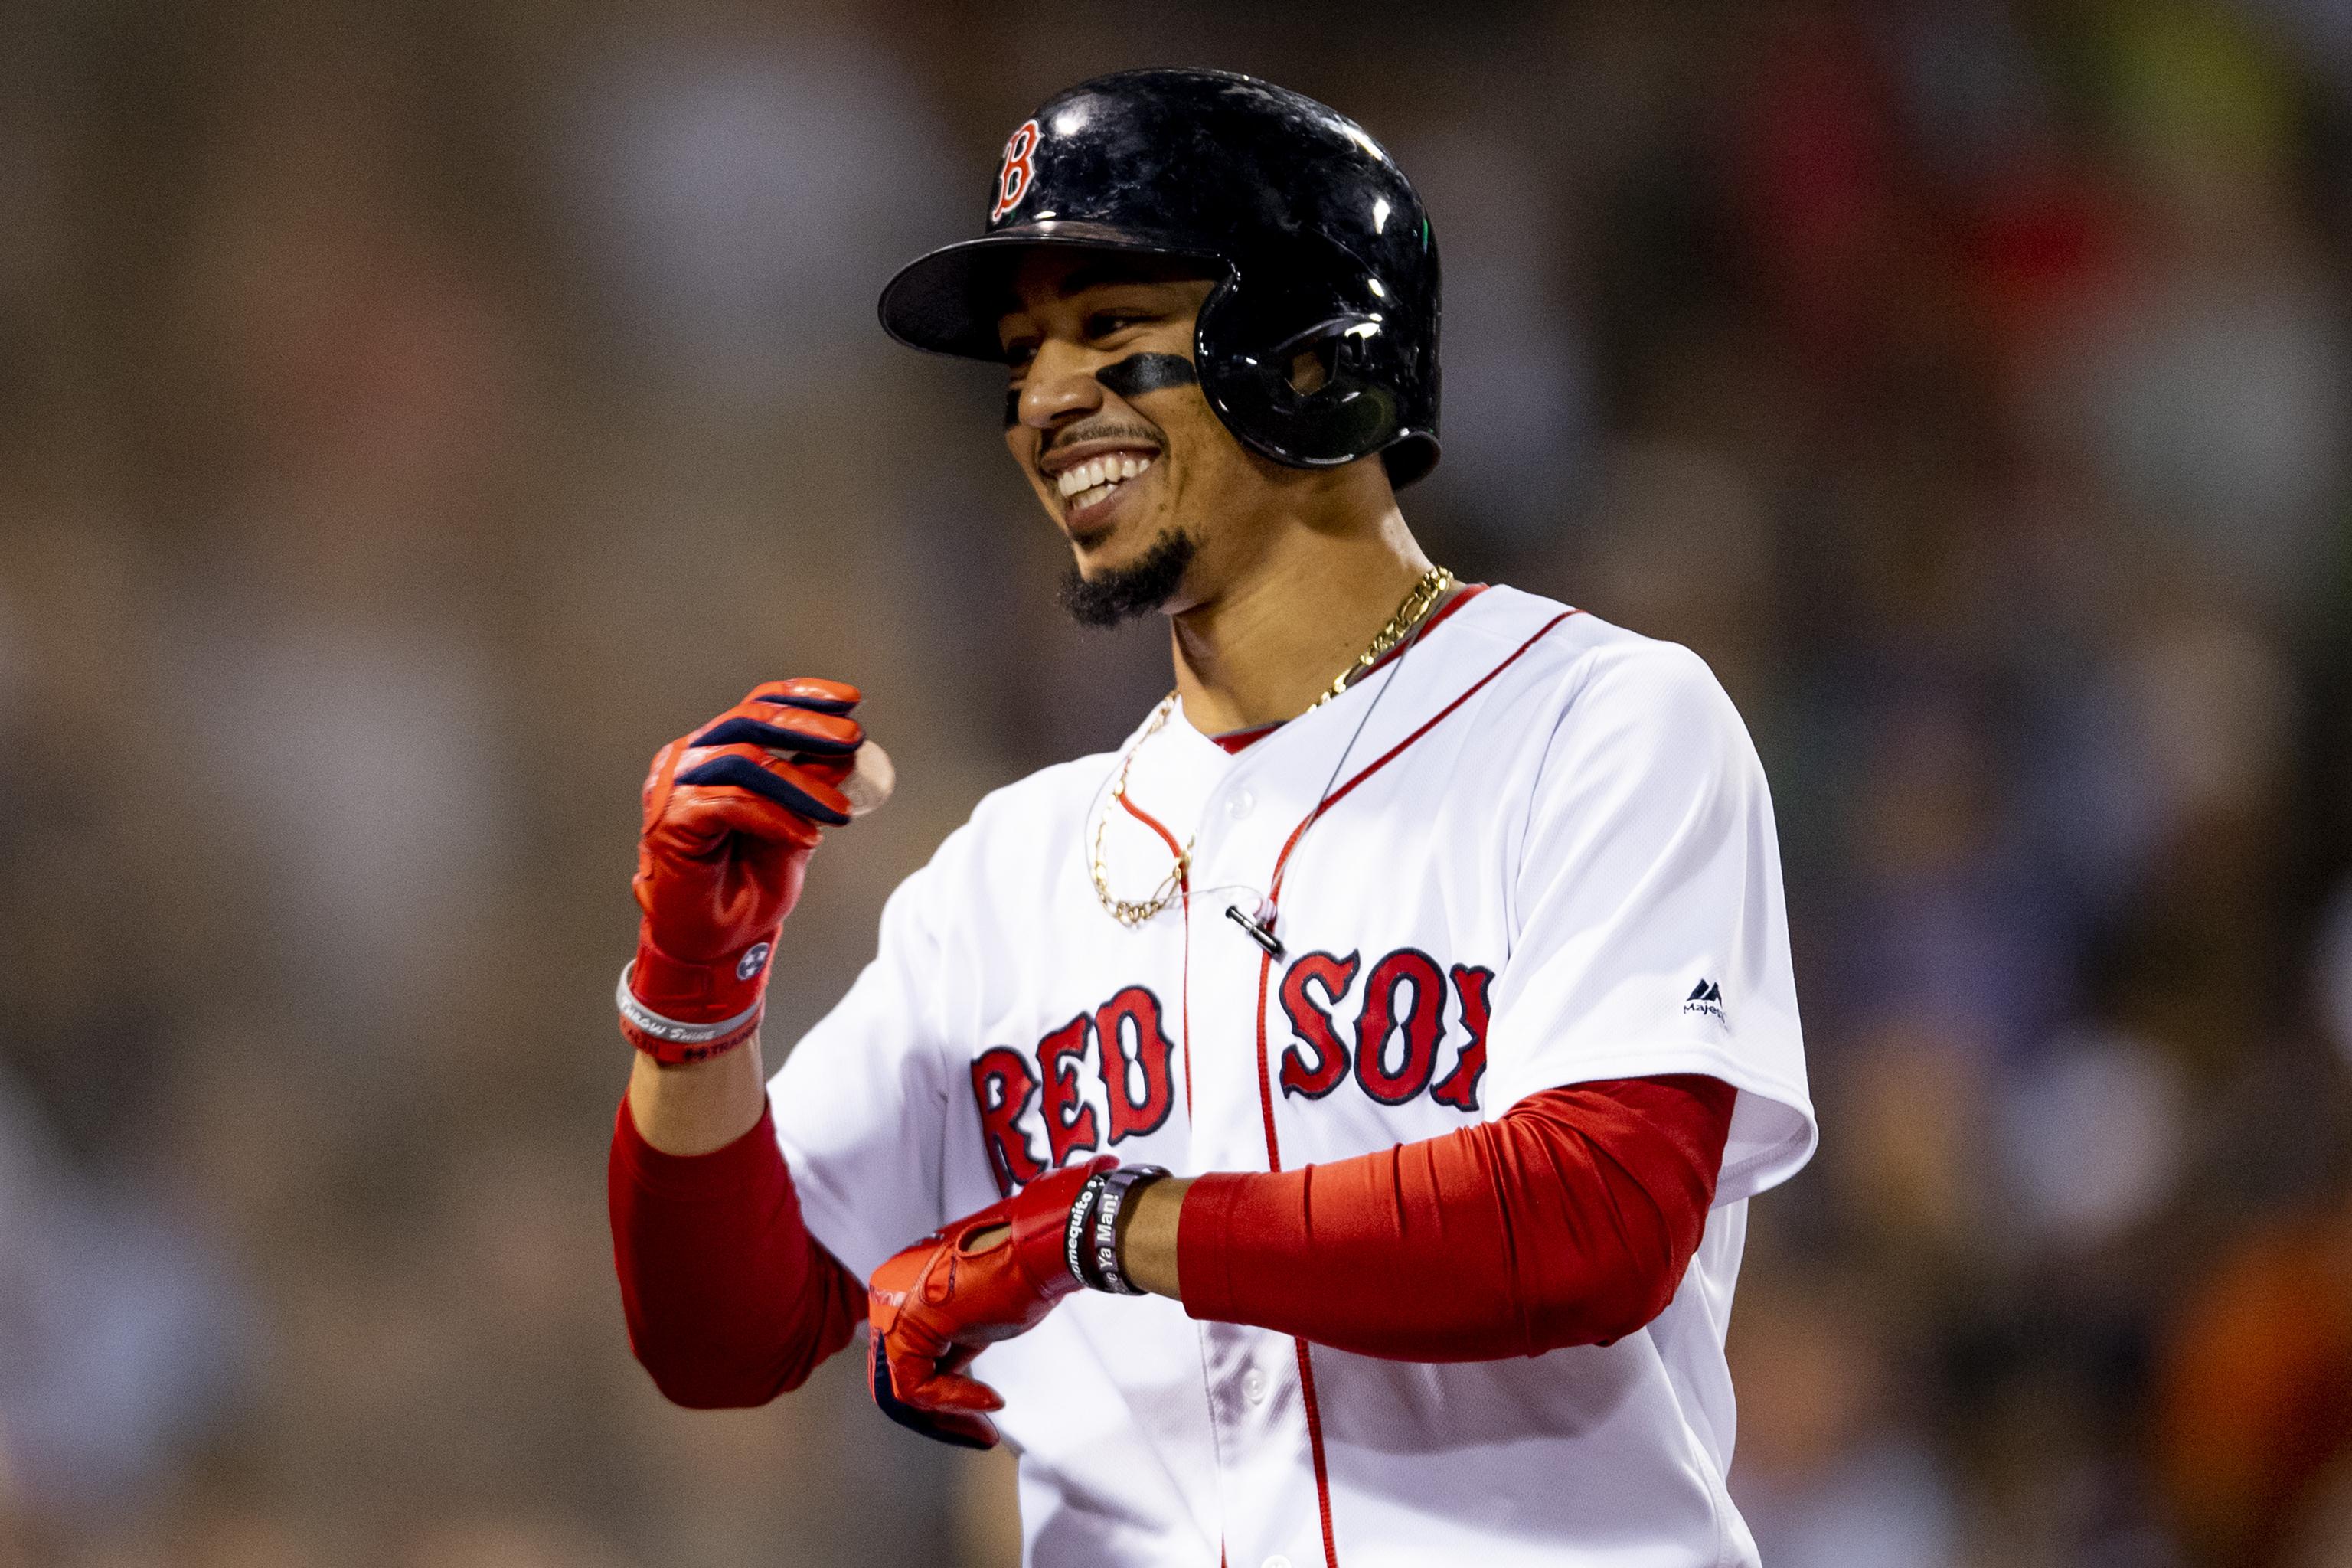 MLB rumors: Red Sox resigned to losing Mookie Betts or J.D. Martinez as  part of plan to slash payroll? (UPDATE) 